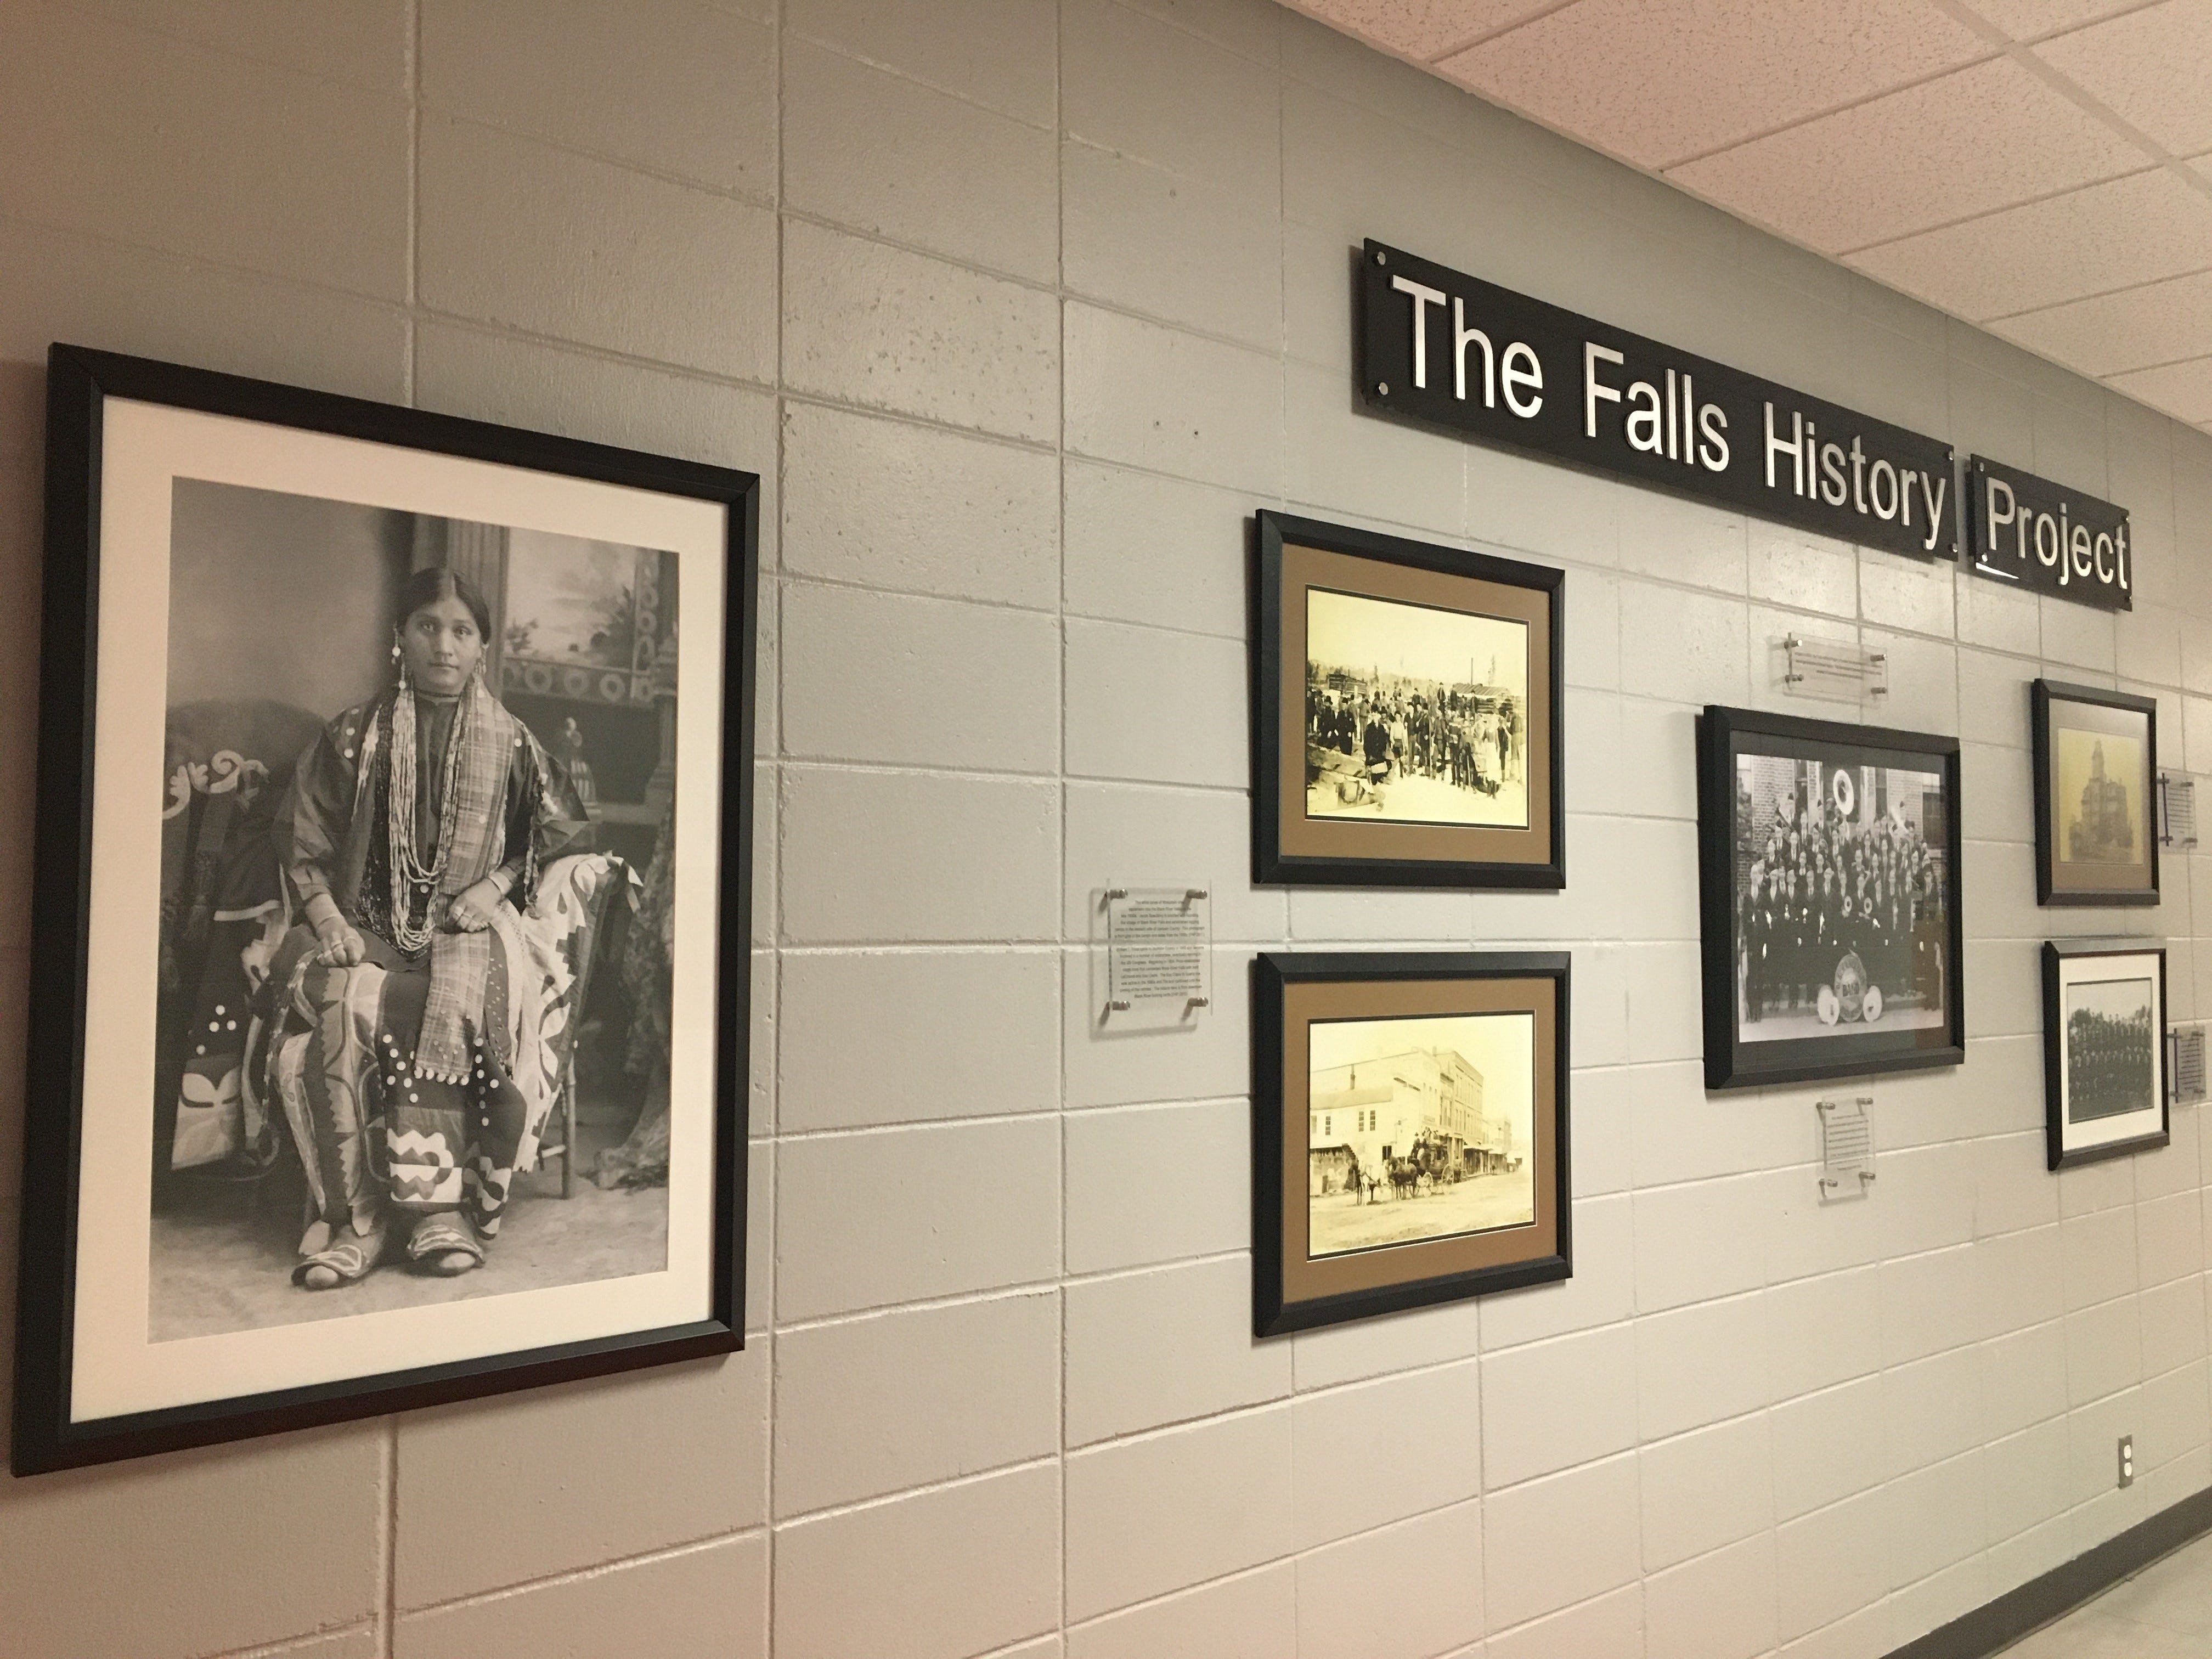 At Black River Falls High School, the school is honoring its shared history between the Ho-Chunk Nation and non-Native settlers with the Falls History Project.